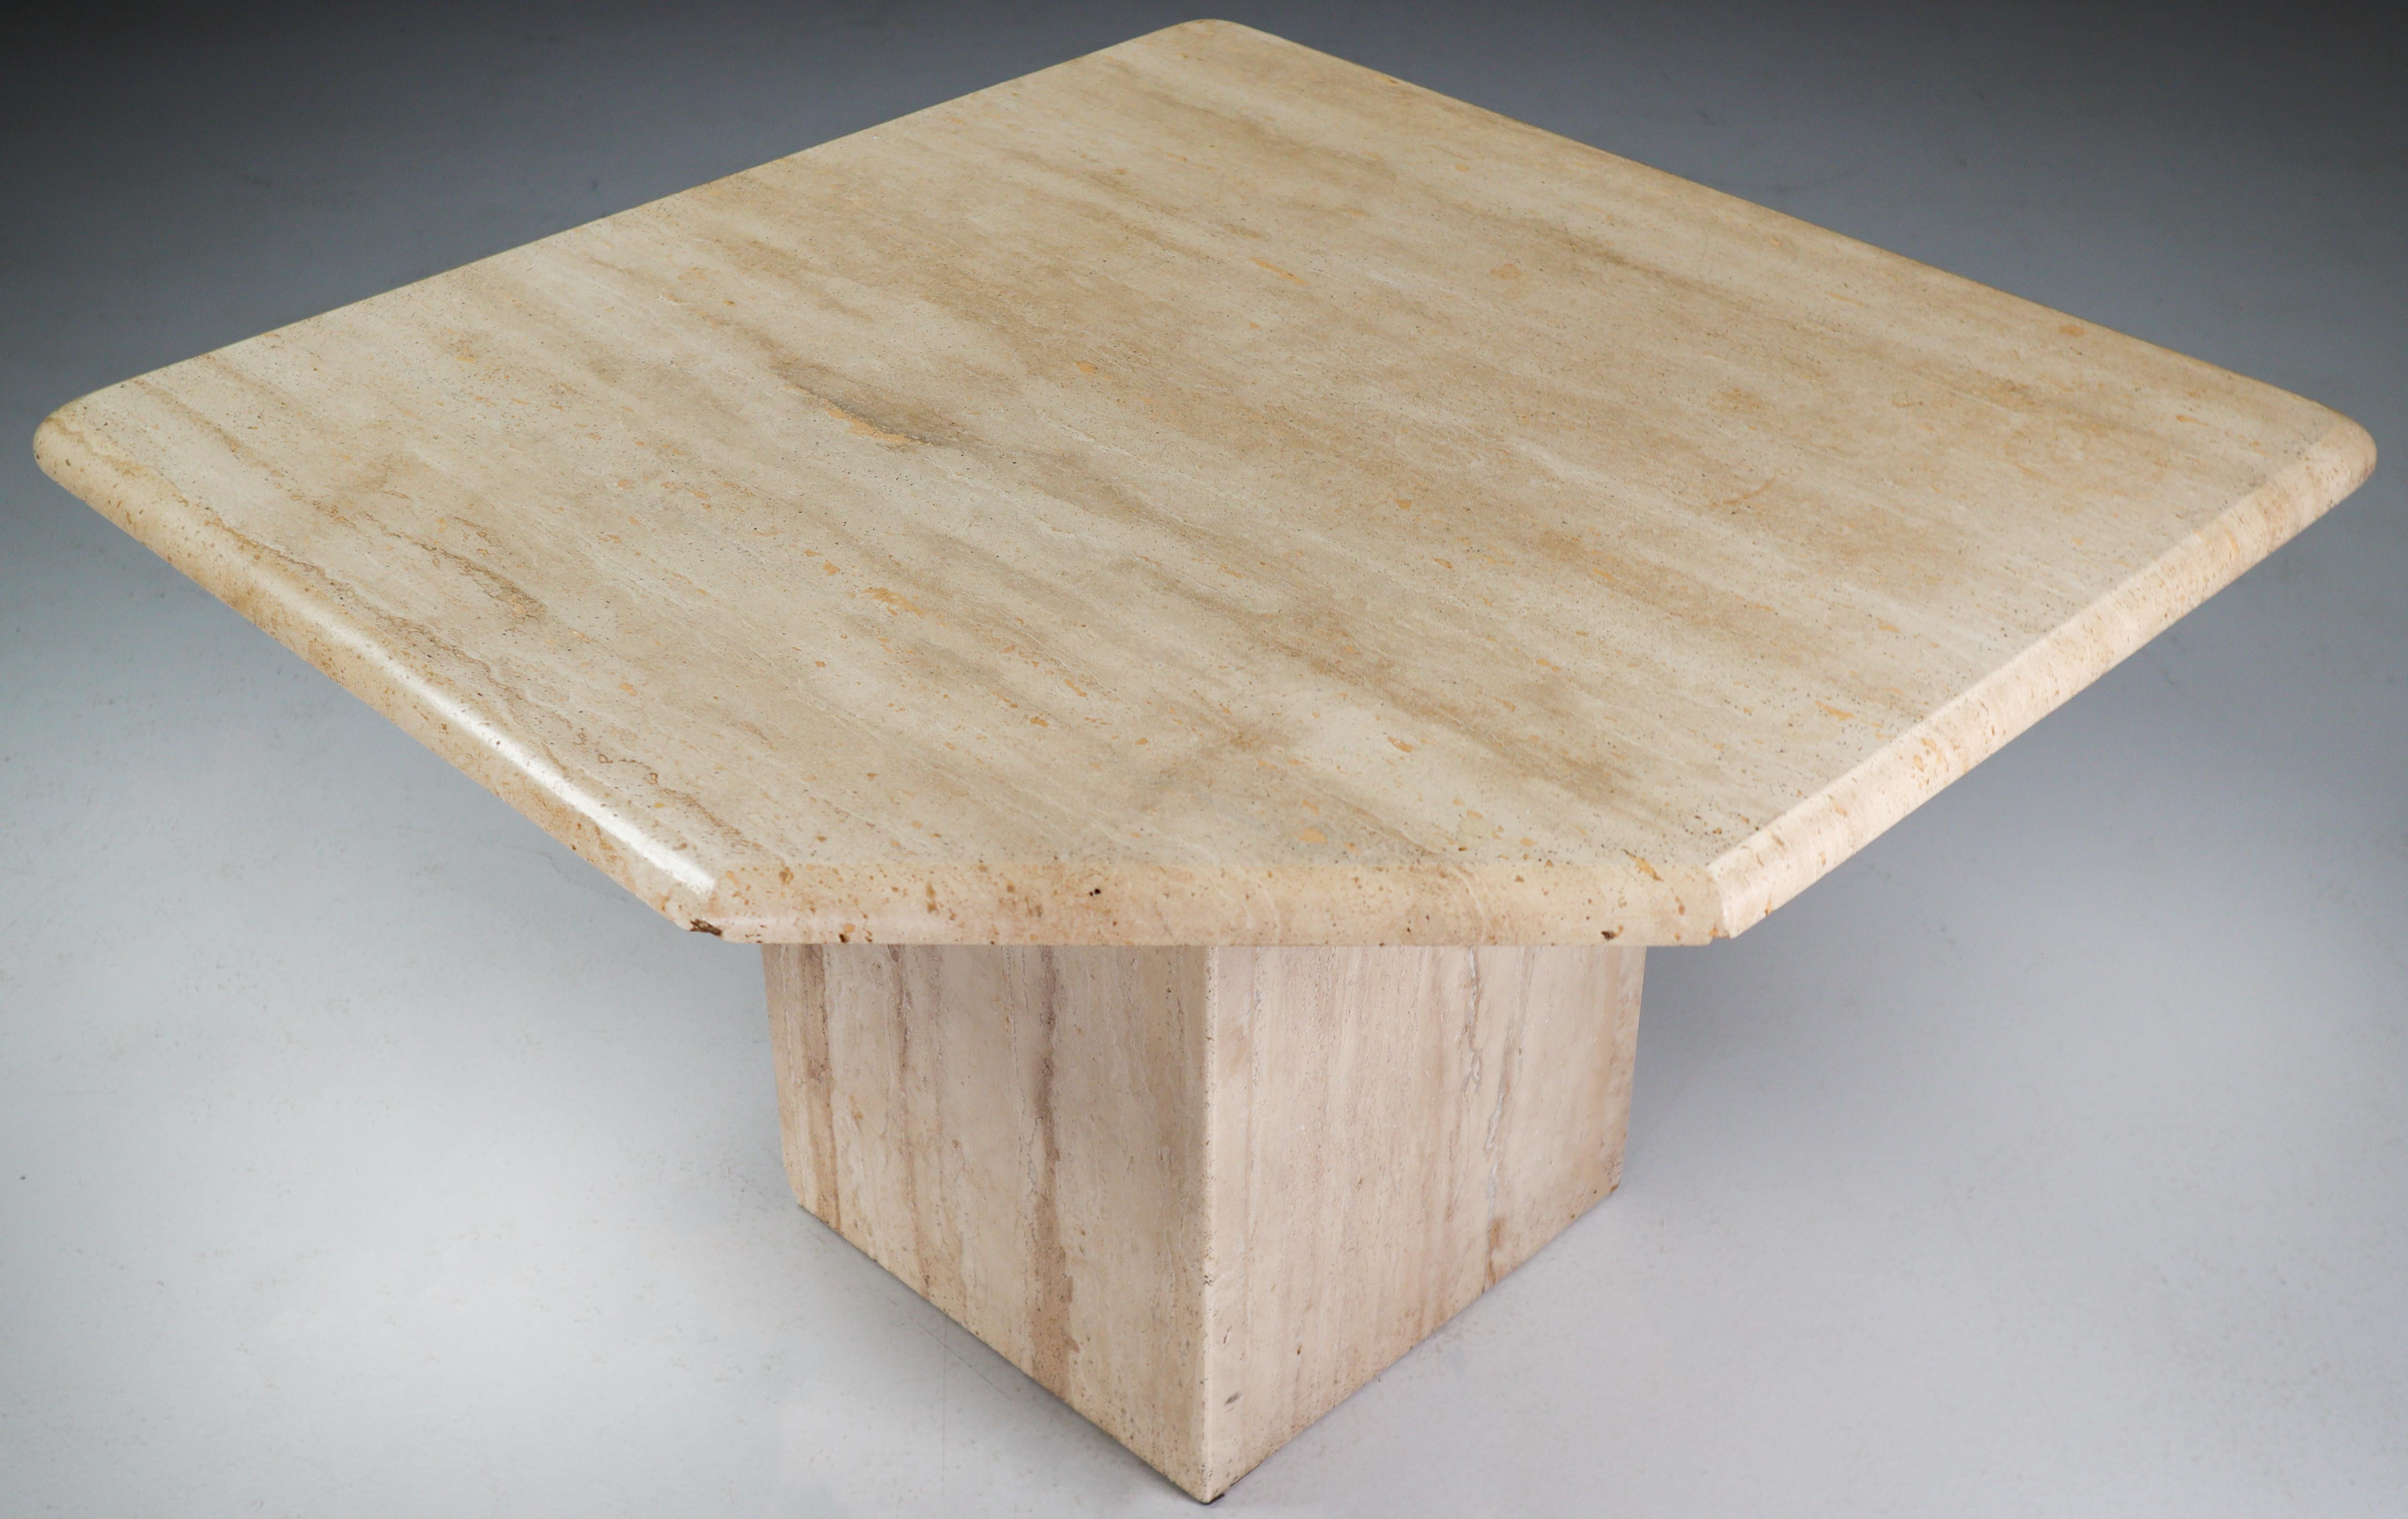 This beautiful post-modern travertine side - coffee table, circa 1970s, has beautiful graining and pentagonal top. This sculptural travertine side table would work great in a Traditional, Transitional, Hollywood Regency, classical or Art Deco room